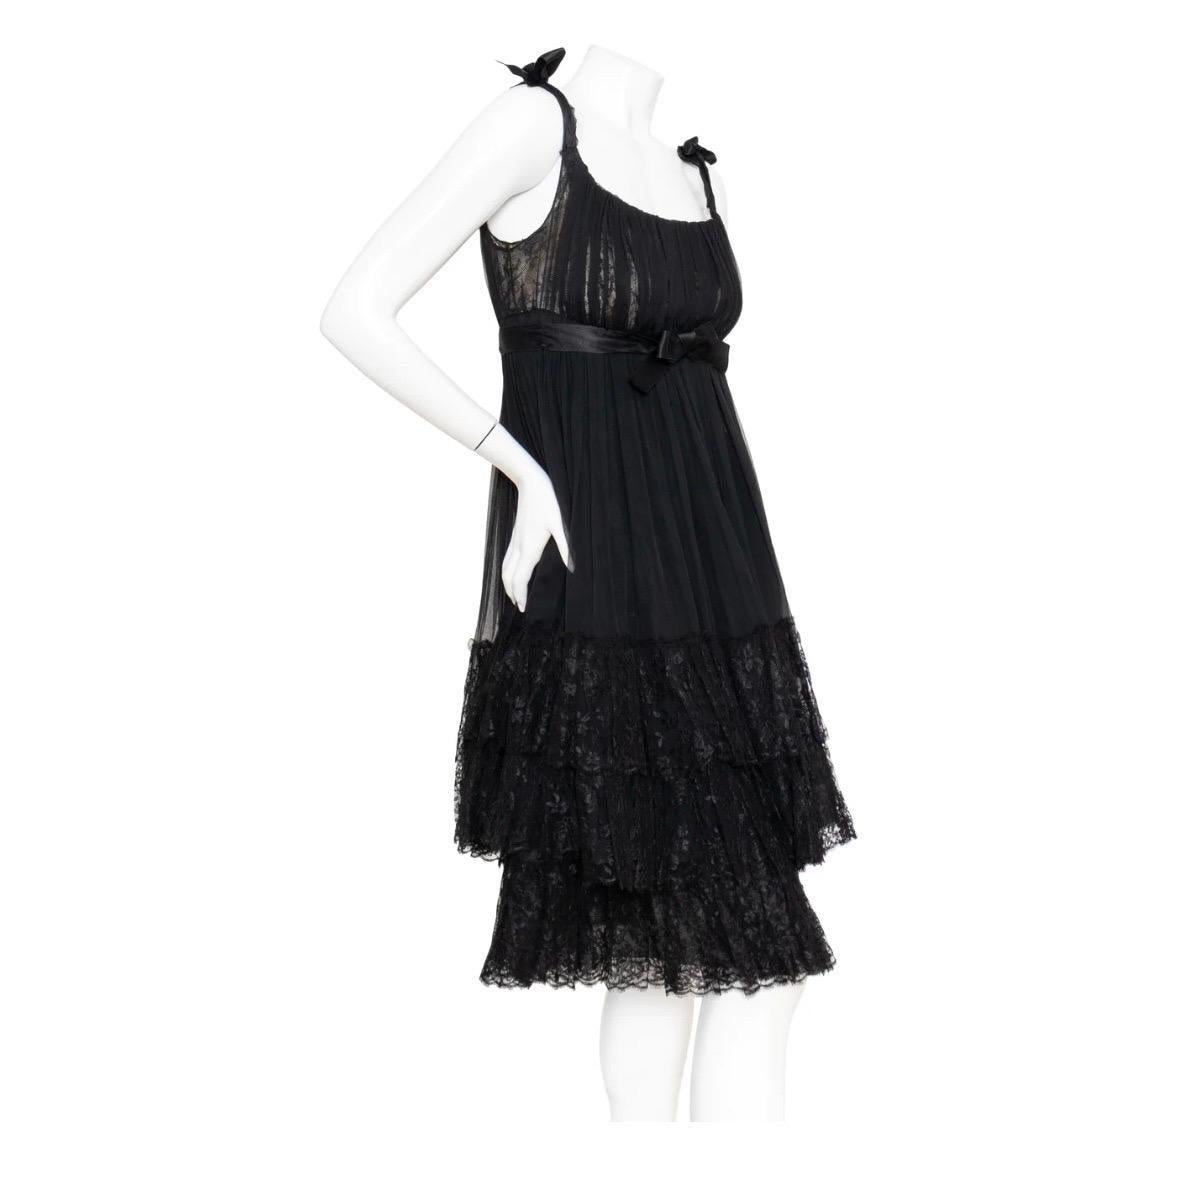 ﻿Balenciaga 1960s Black Chiffon and Lace Babydoll Dress

Description

Chiffon and Lace Babydoll Dress by Cristobal Balenciaga
1960s Haute Couture original; vintage 
Black/Nude
Spanish inspired
Thin strap; bow detail can be worn on shoulder or